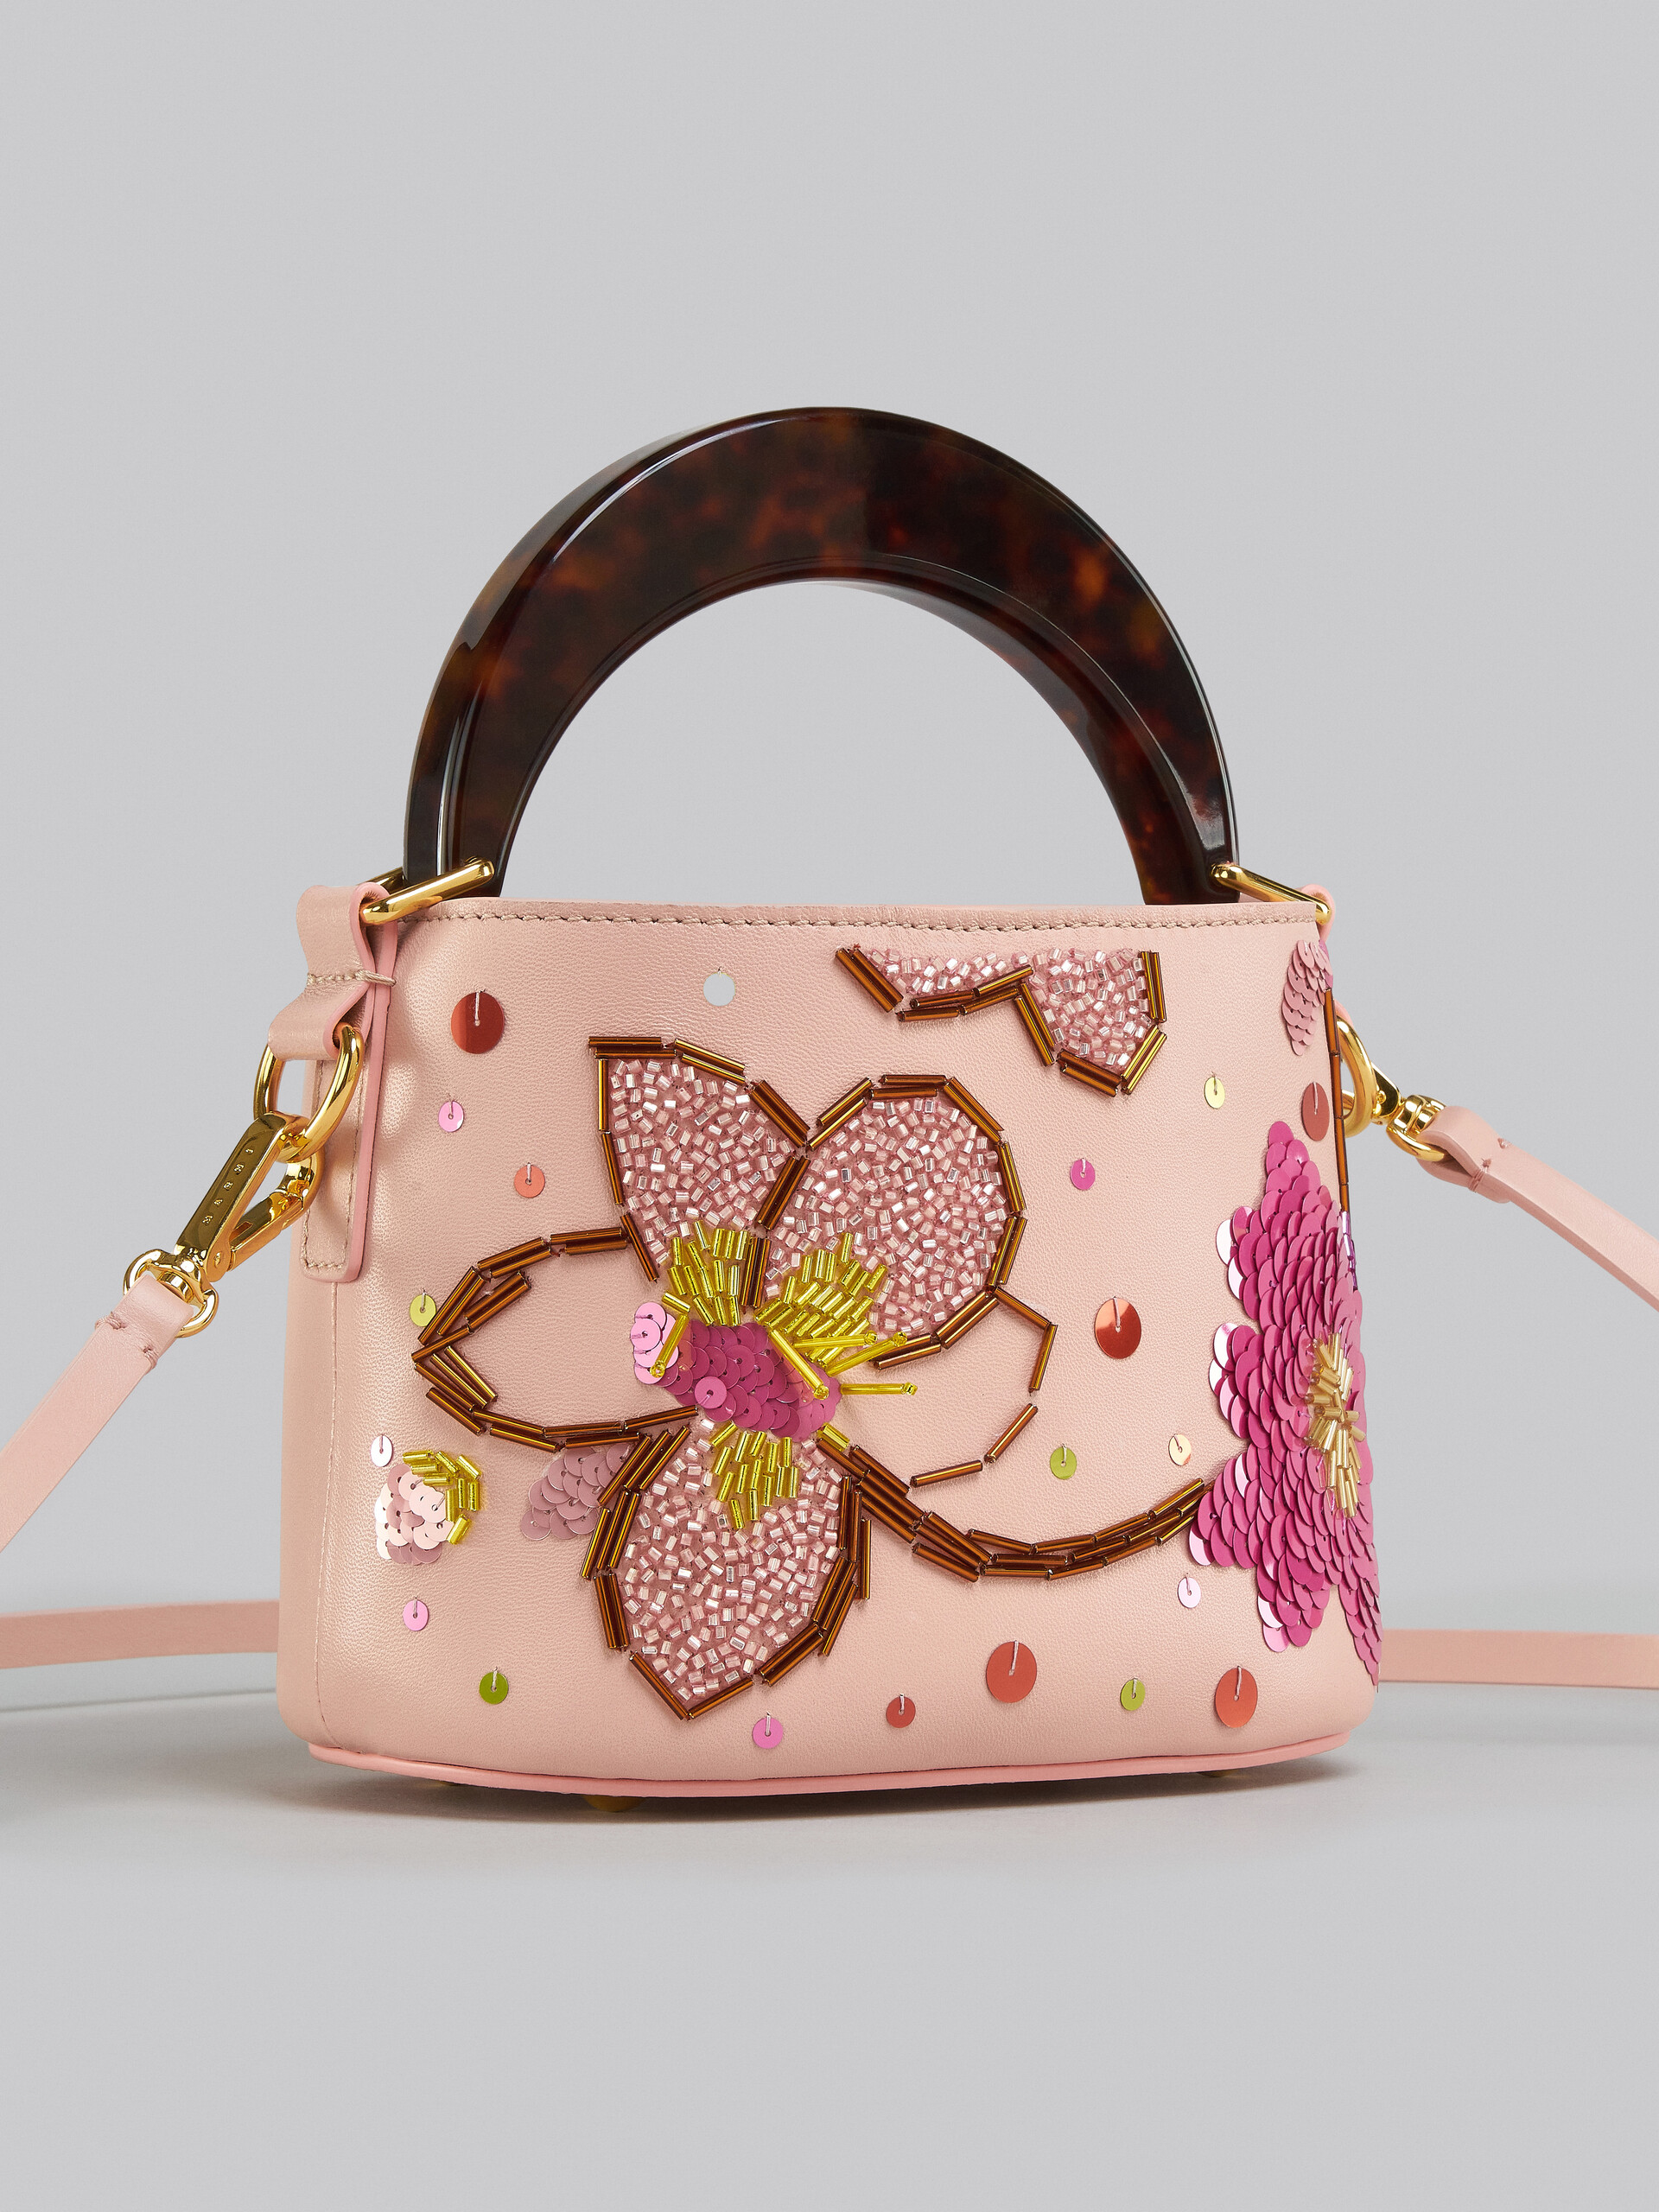 Venice Mini Bucket in embroidered pink leather - Shoulder Bag - Image 4